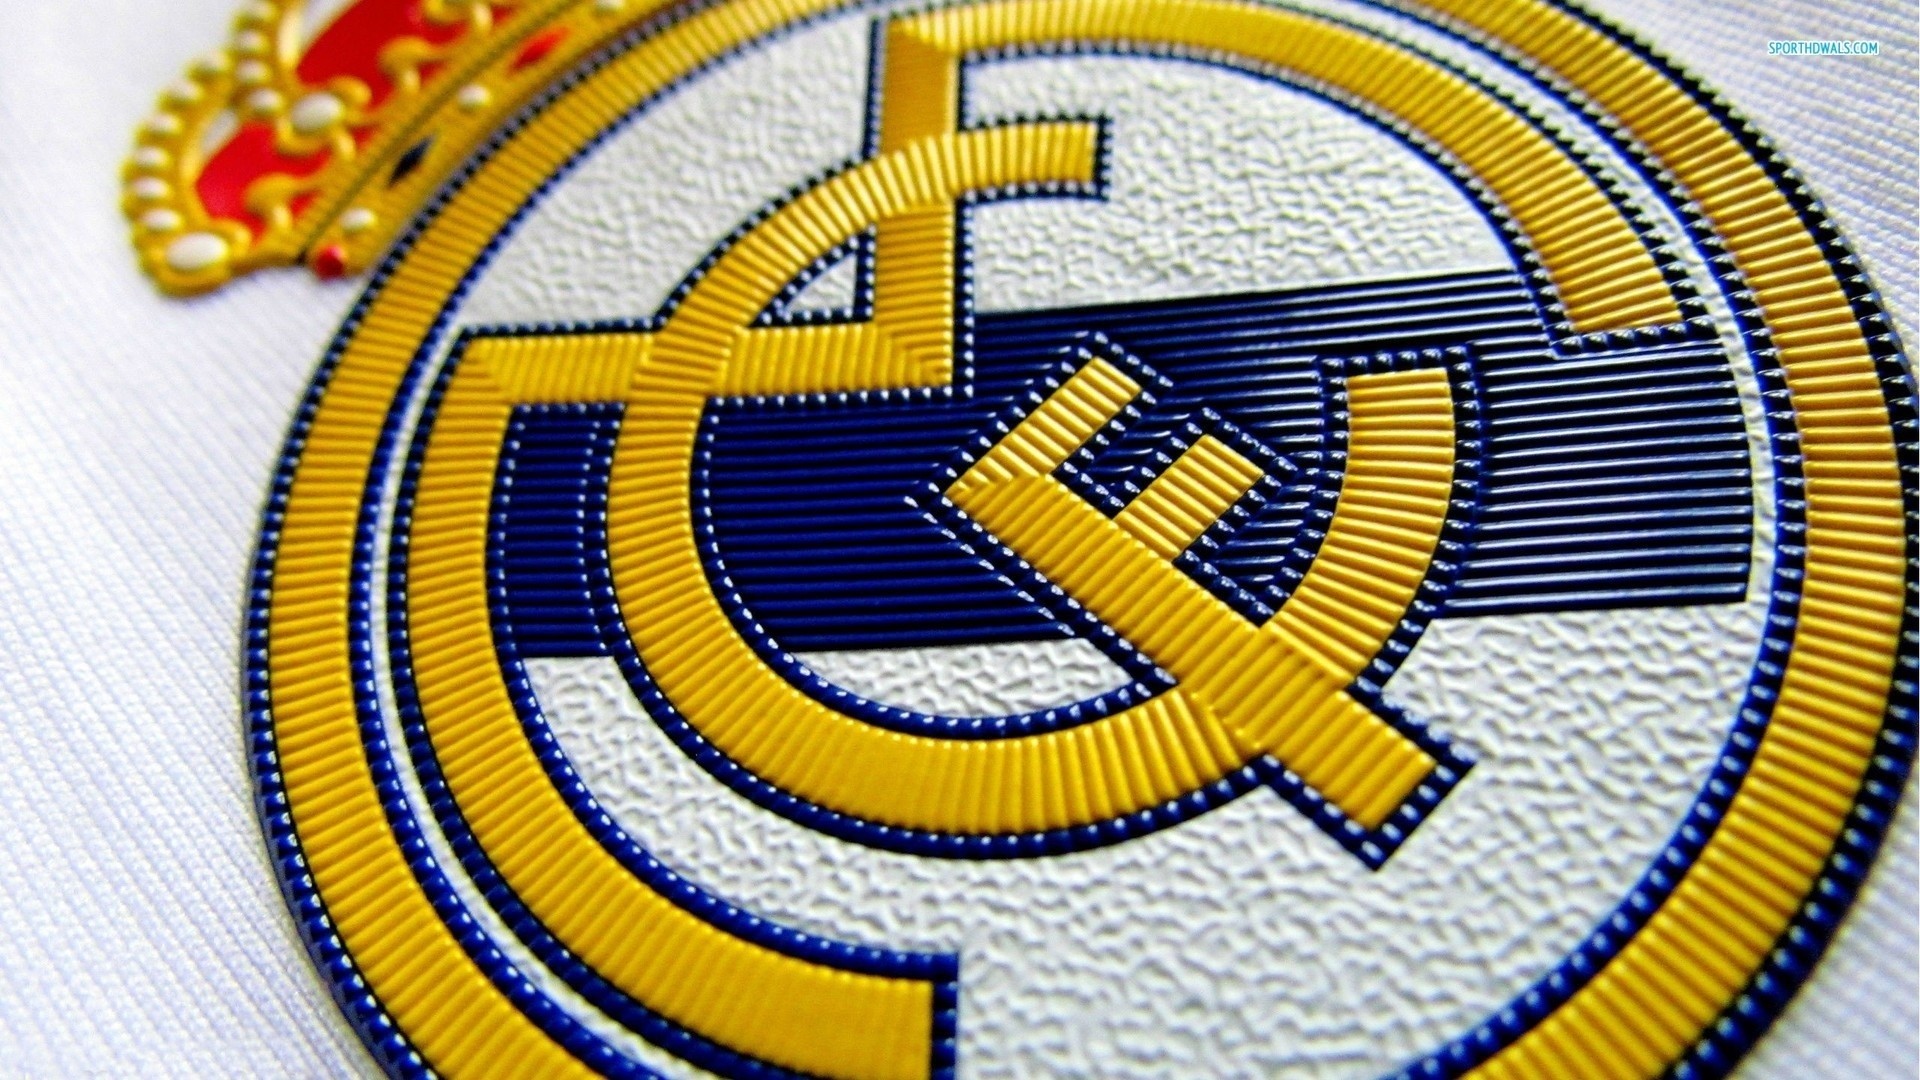 Real Madrid Backgrounds HD with resolution 1920x1080 pixel. You can make this wallpaper for your Mac or Windows Desktop Background, iPhone, Android or Tablet and another Smartphone device